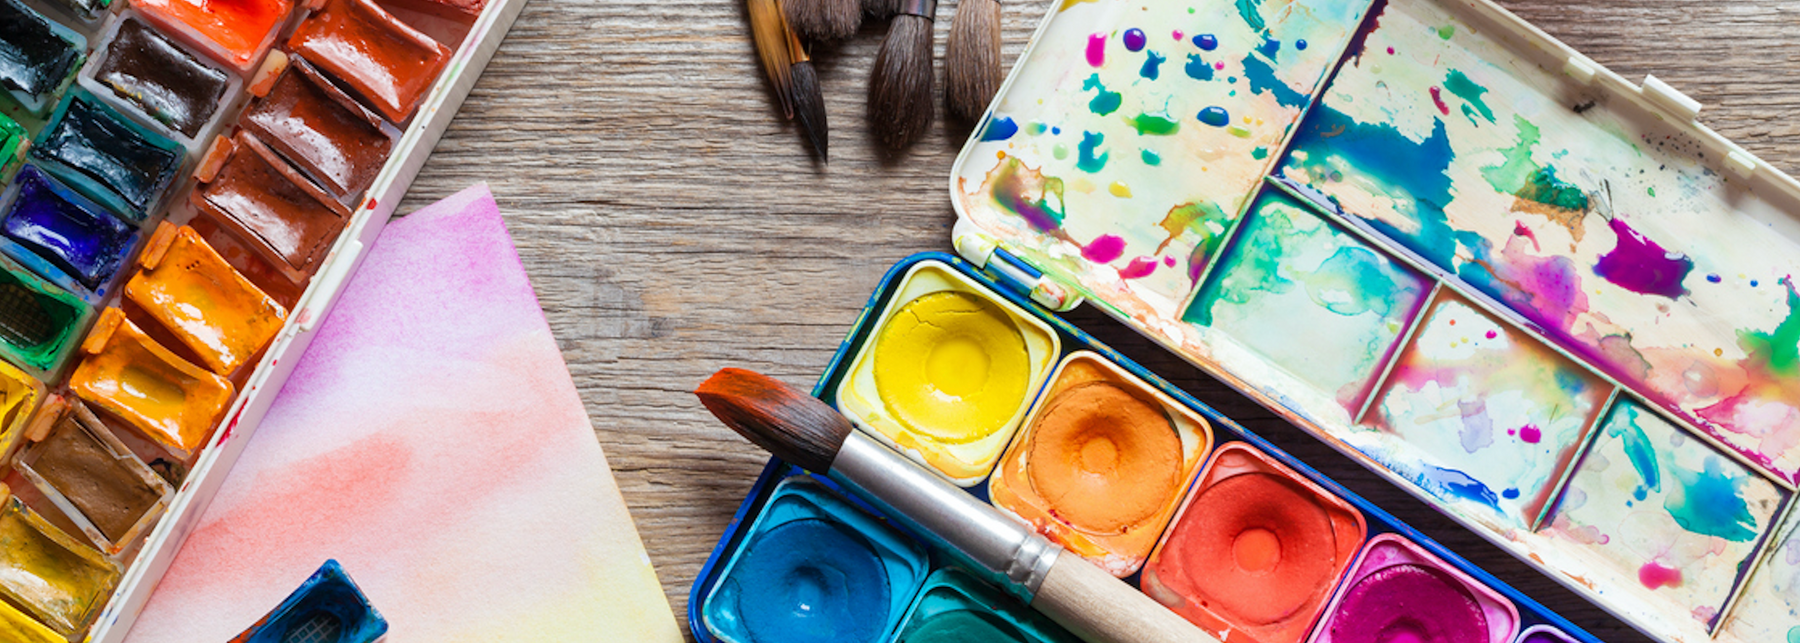 The Importance of Art in the Curriculum